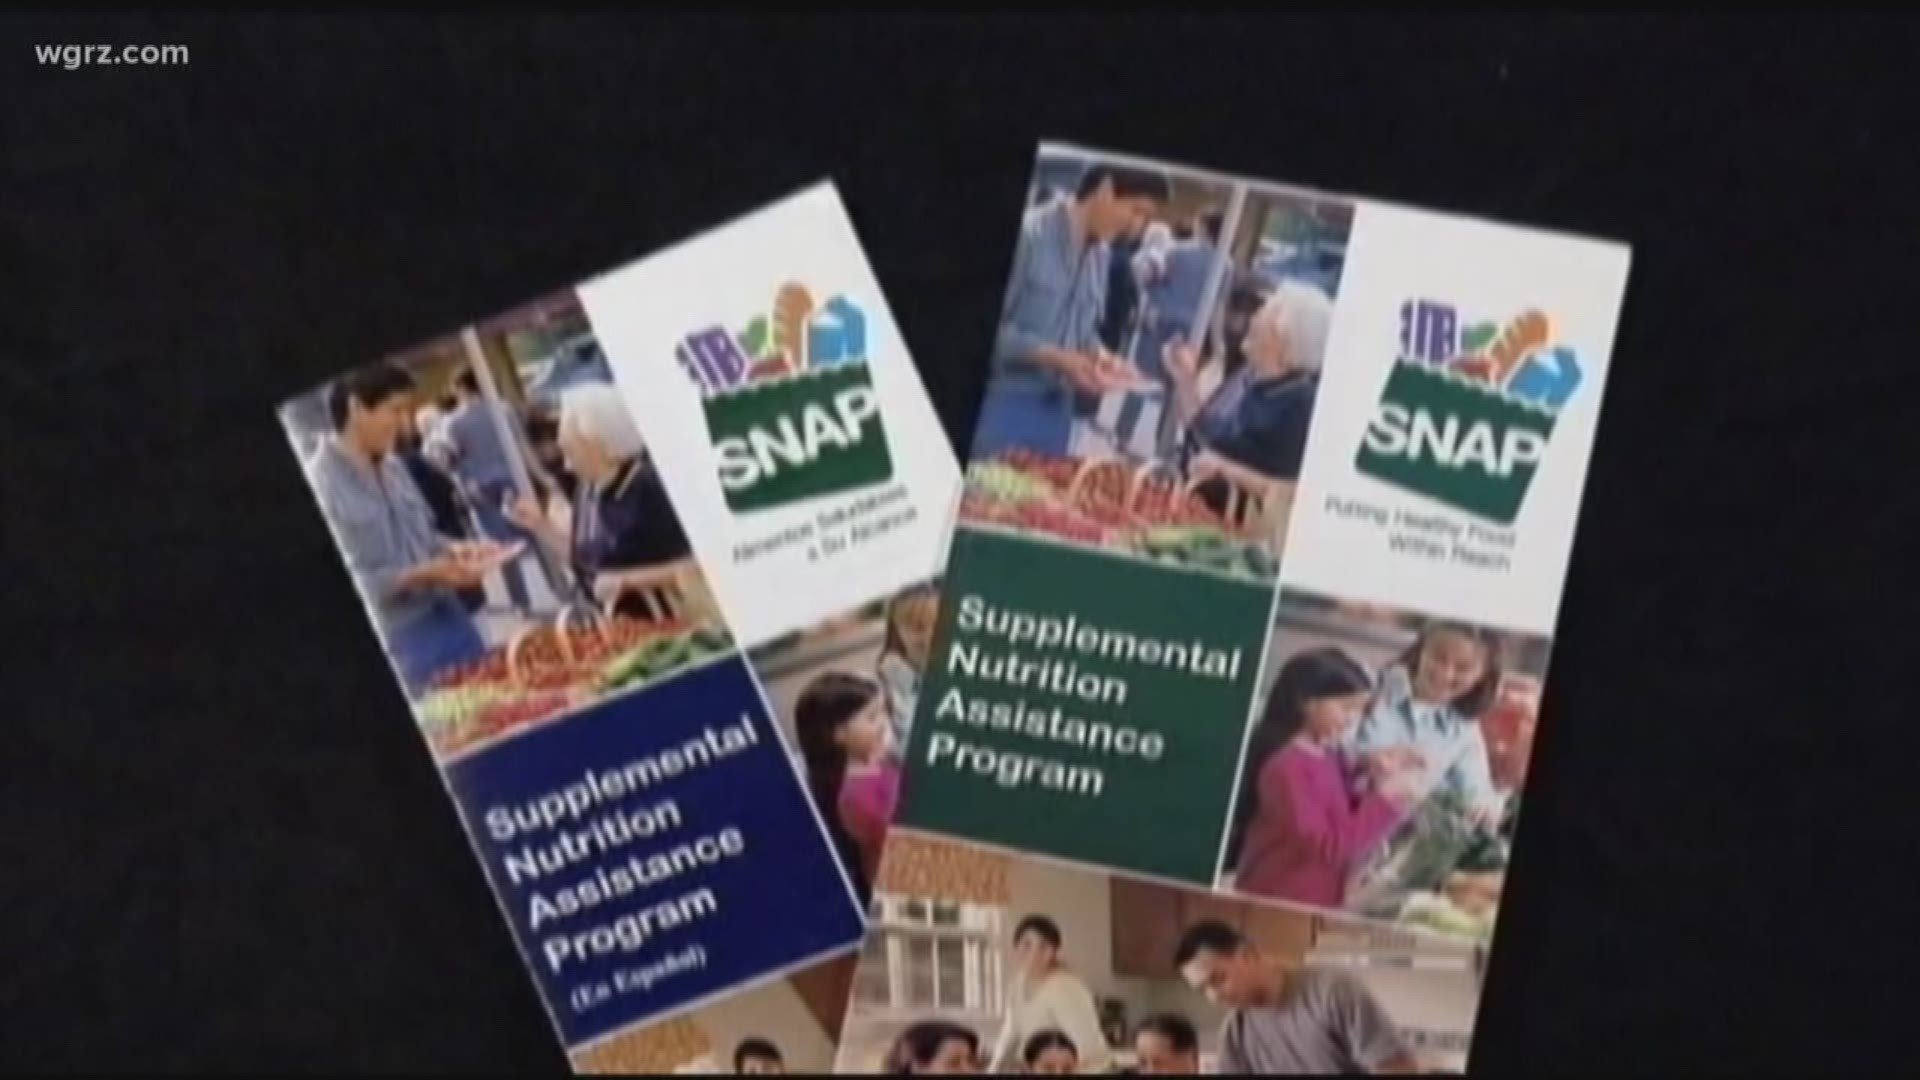 New York food stamp benefits to be released early